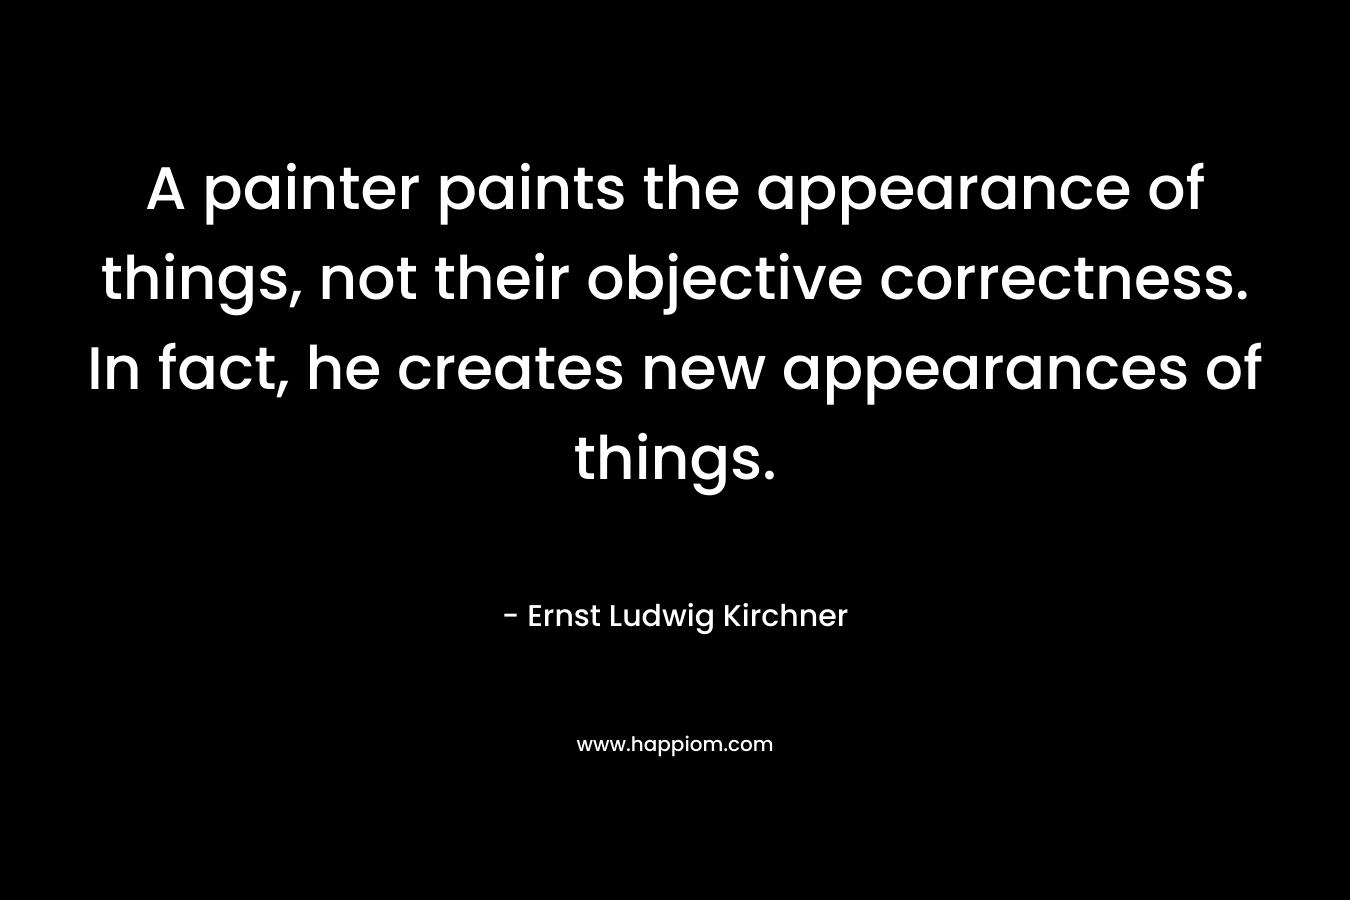 A painter paints the appearance of things, not their objective correctness. In fact, he creates new appearances of things. – Ernst Ludwig Kirchner